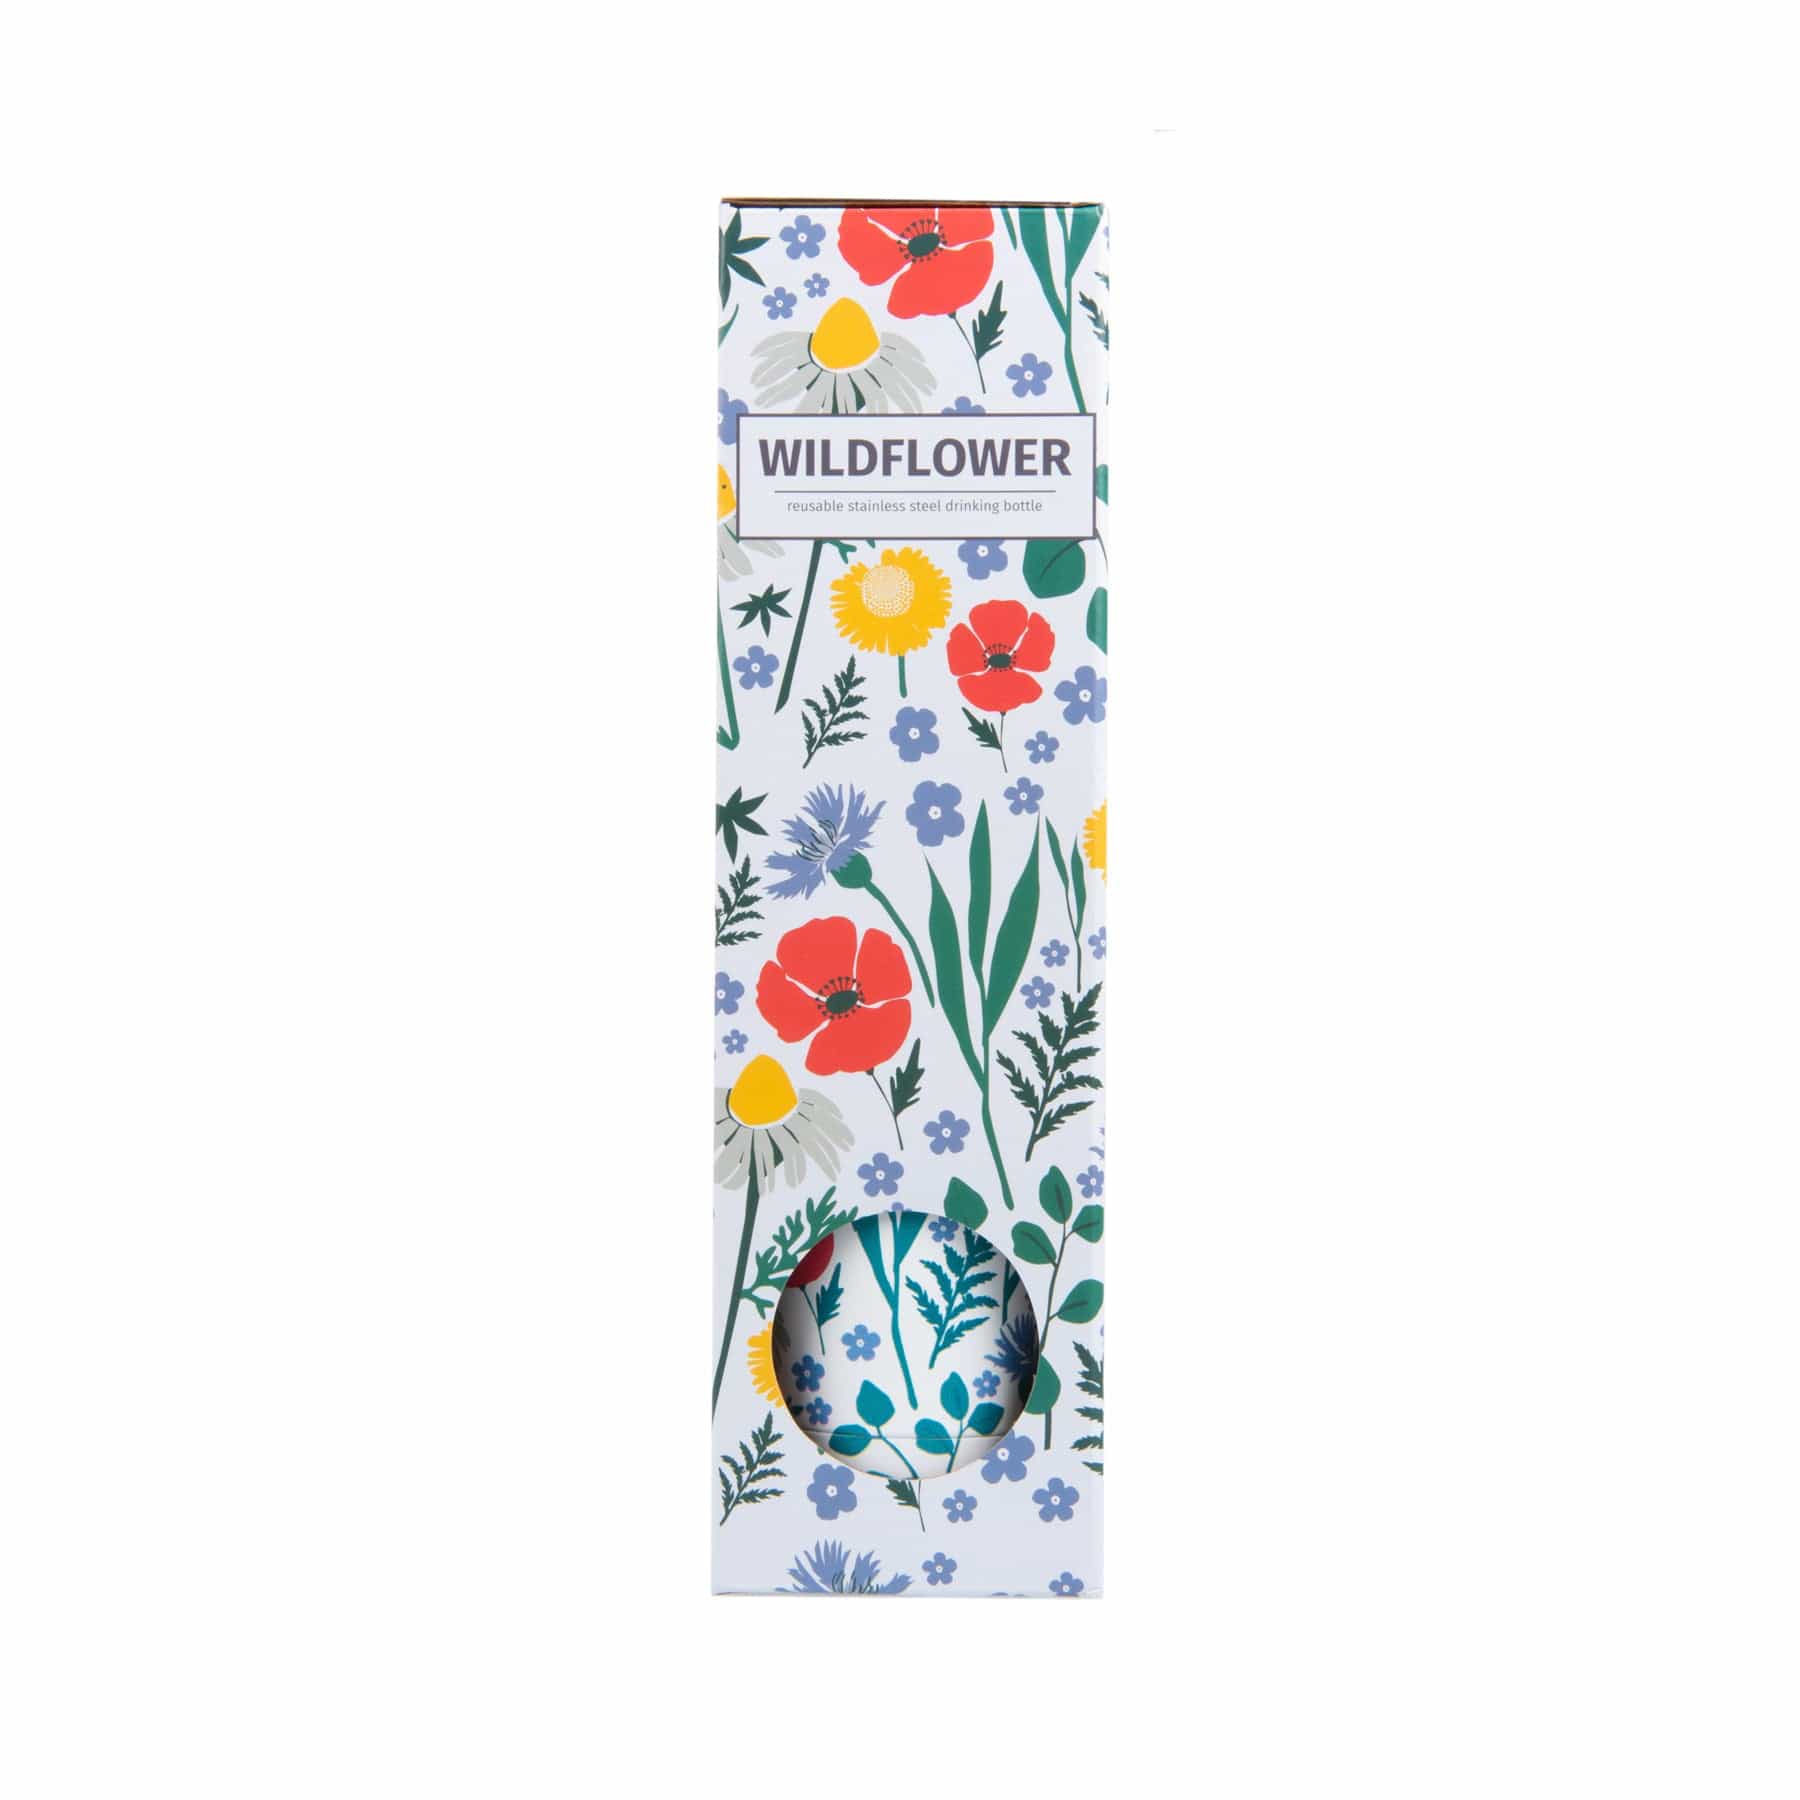 Wildflower pattern reusable stainless steel drinking bottle packaging with floral design on white background